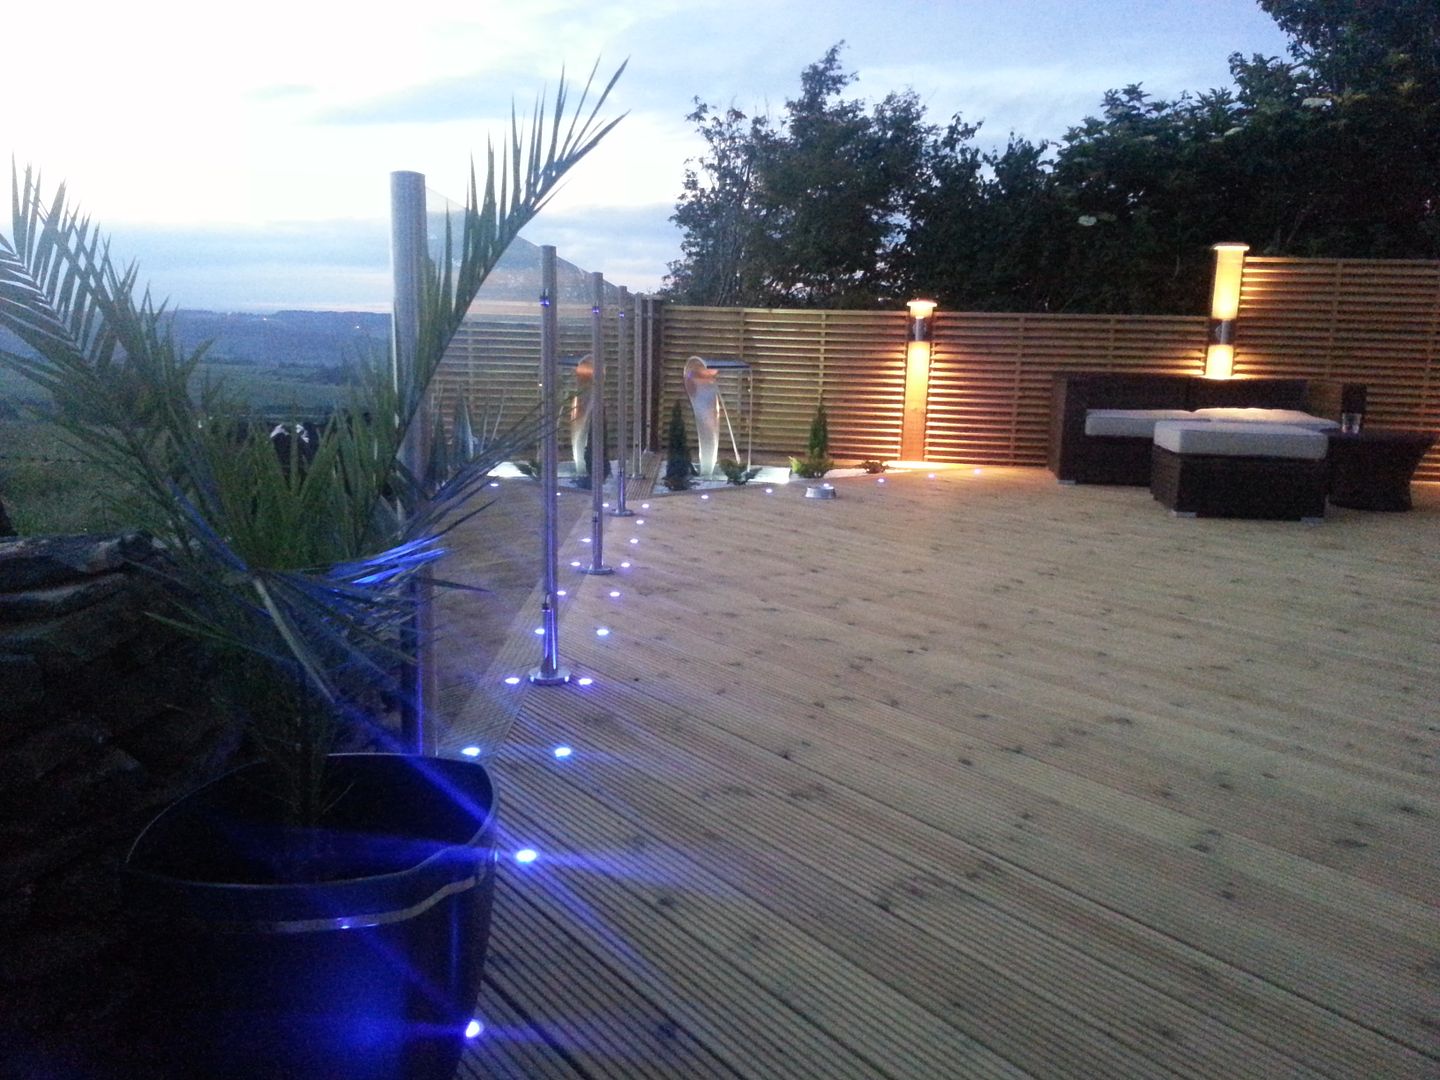 stainless steel glass balcony system with lighting on decking rails